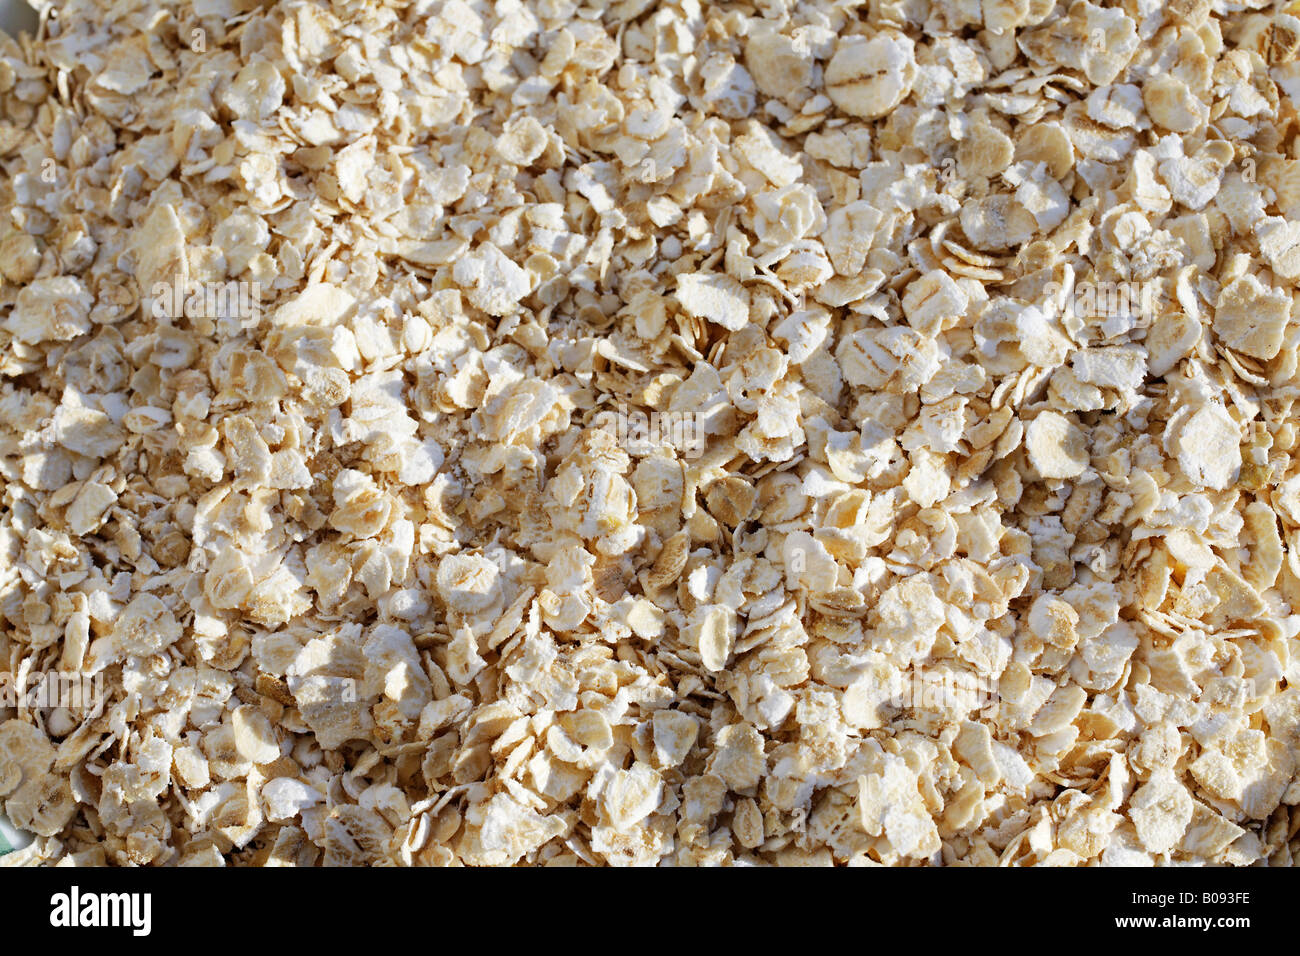 Oat flakes, rolled oats Stock Photo